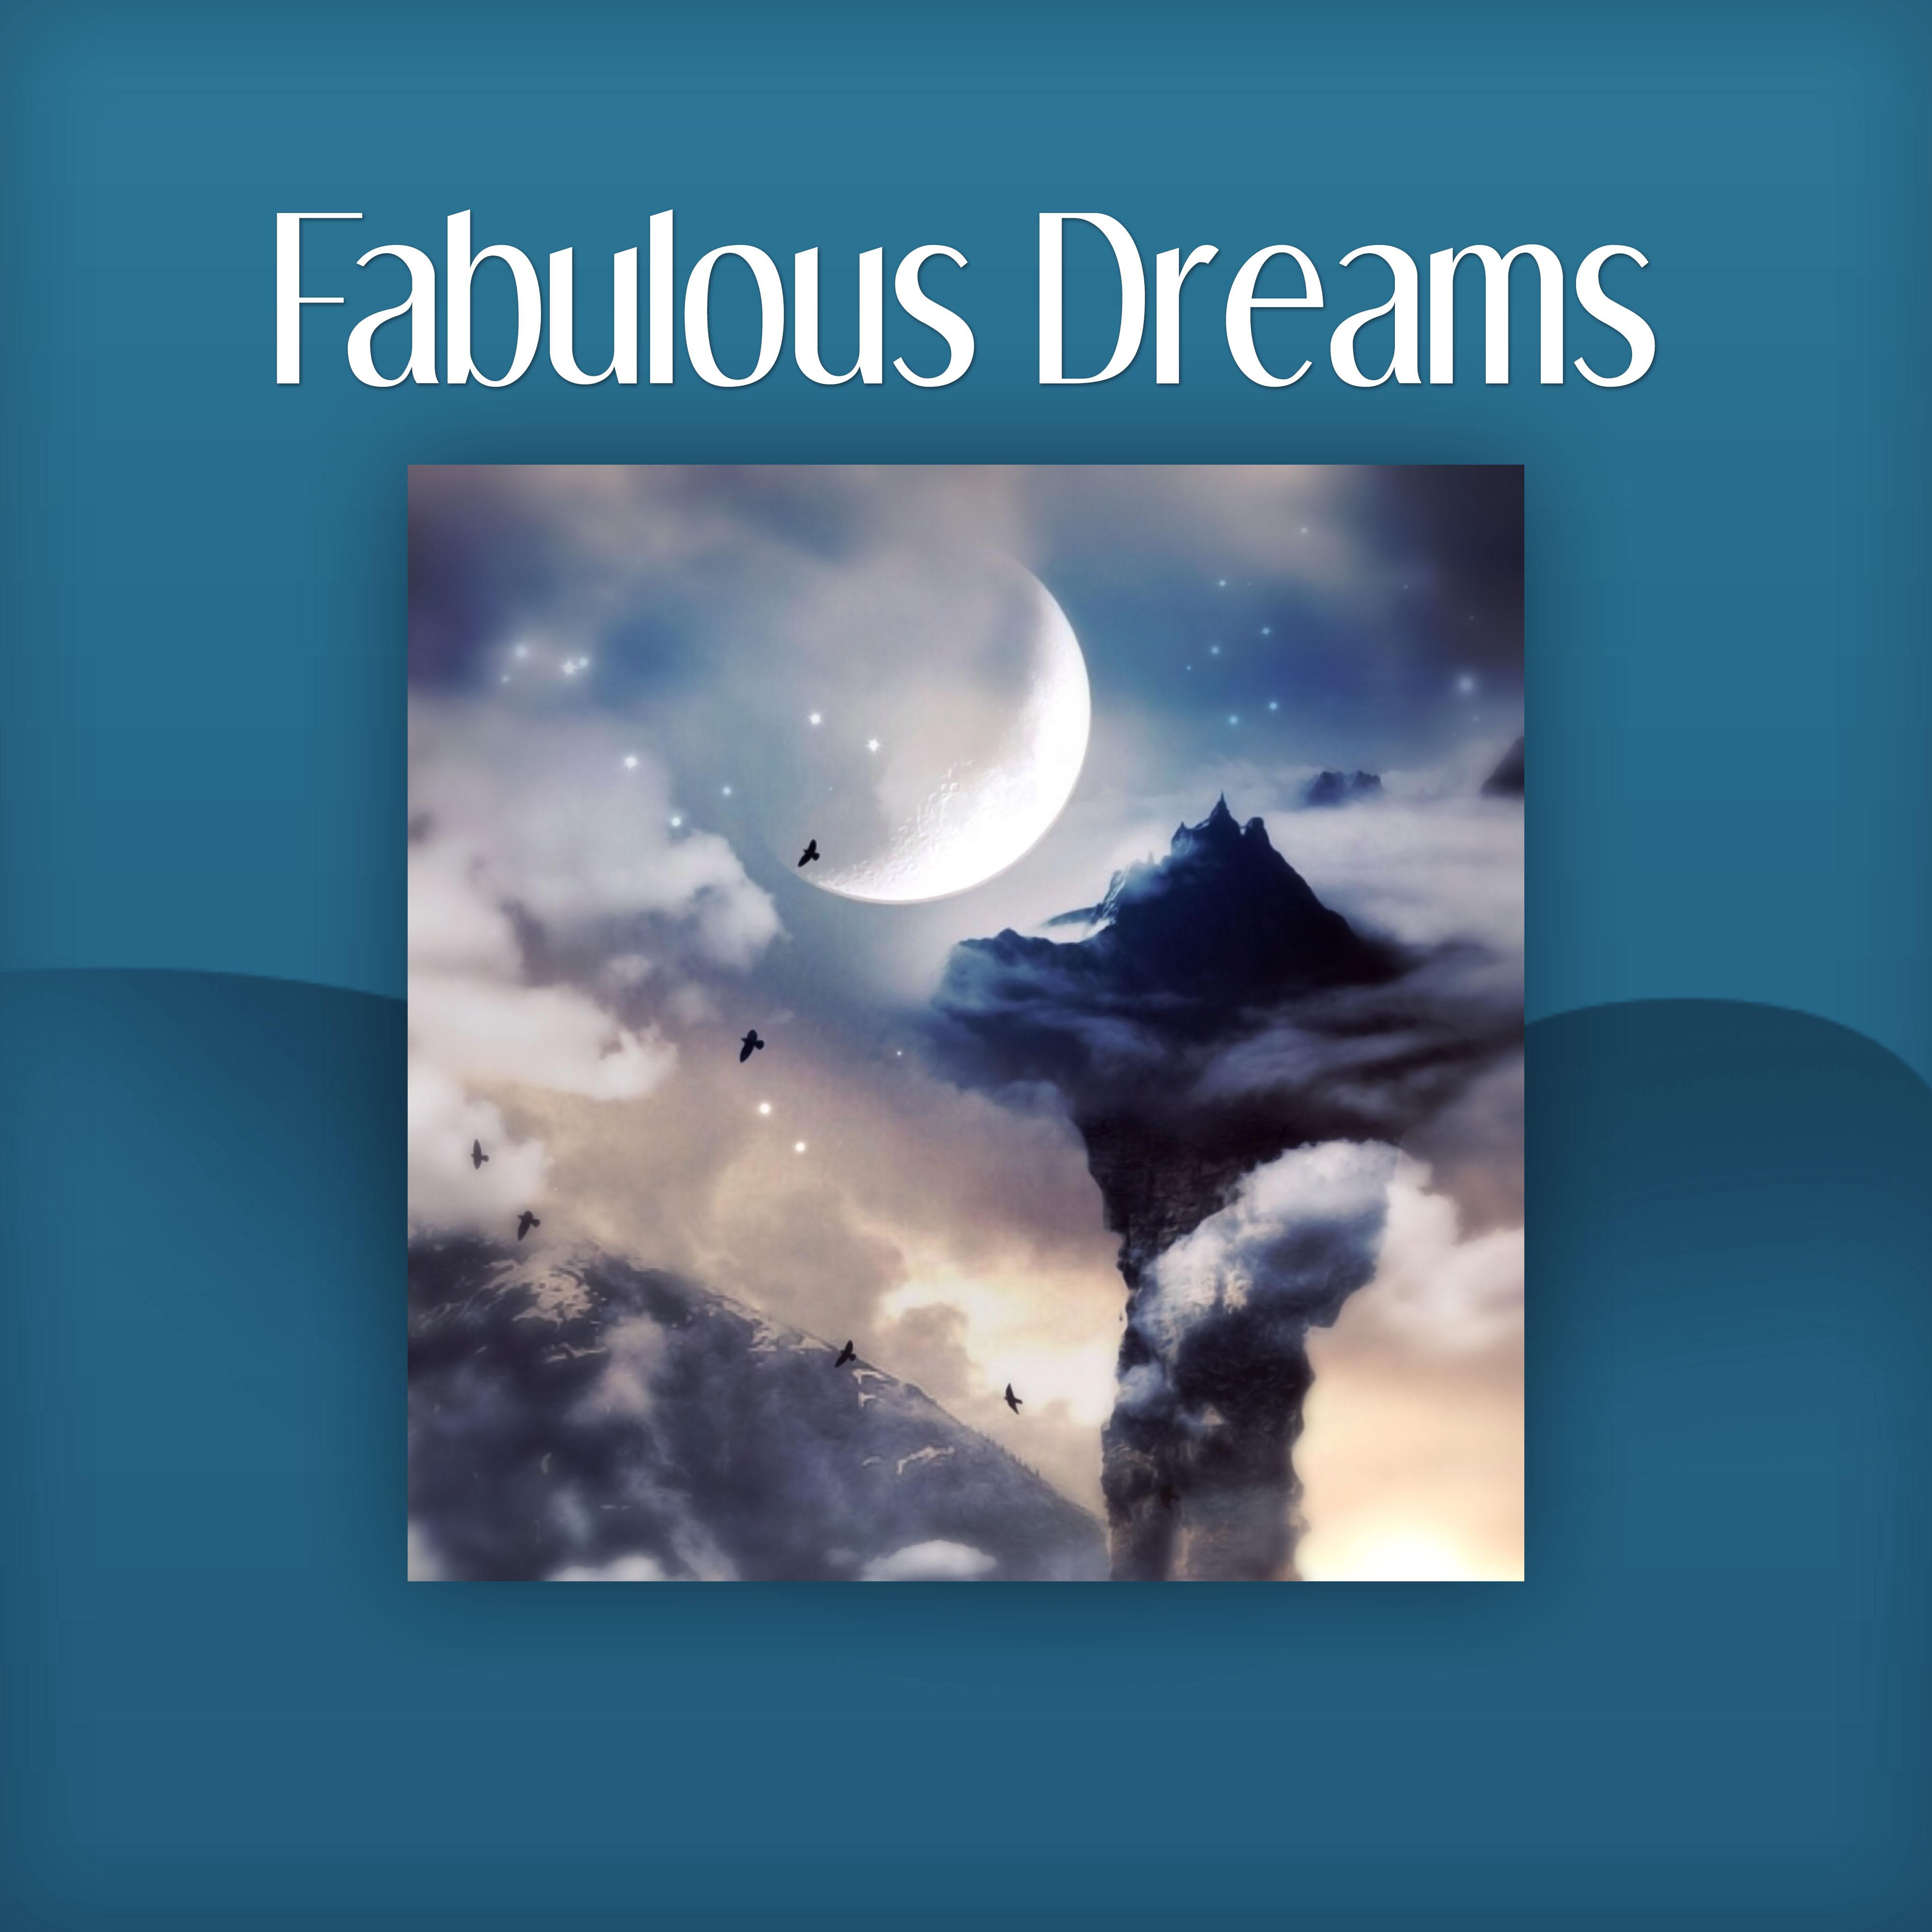 Fabulous Dreams – Fabulous Songs for Baby, Calm  Down Baby, Lullabies for Newborns, Nature Sounds to Baby Massage, Relieve Stress, Help Your Baby Sleep Through the Night